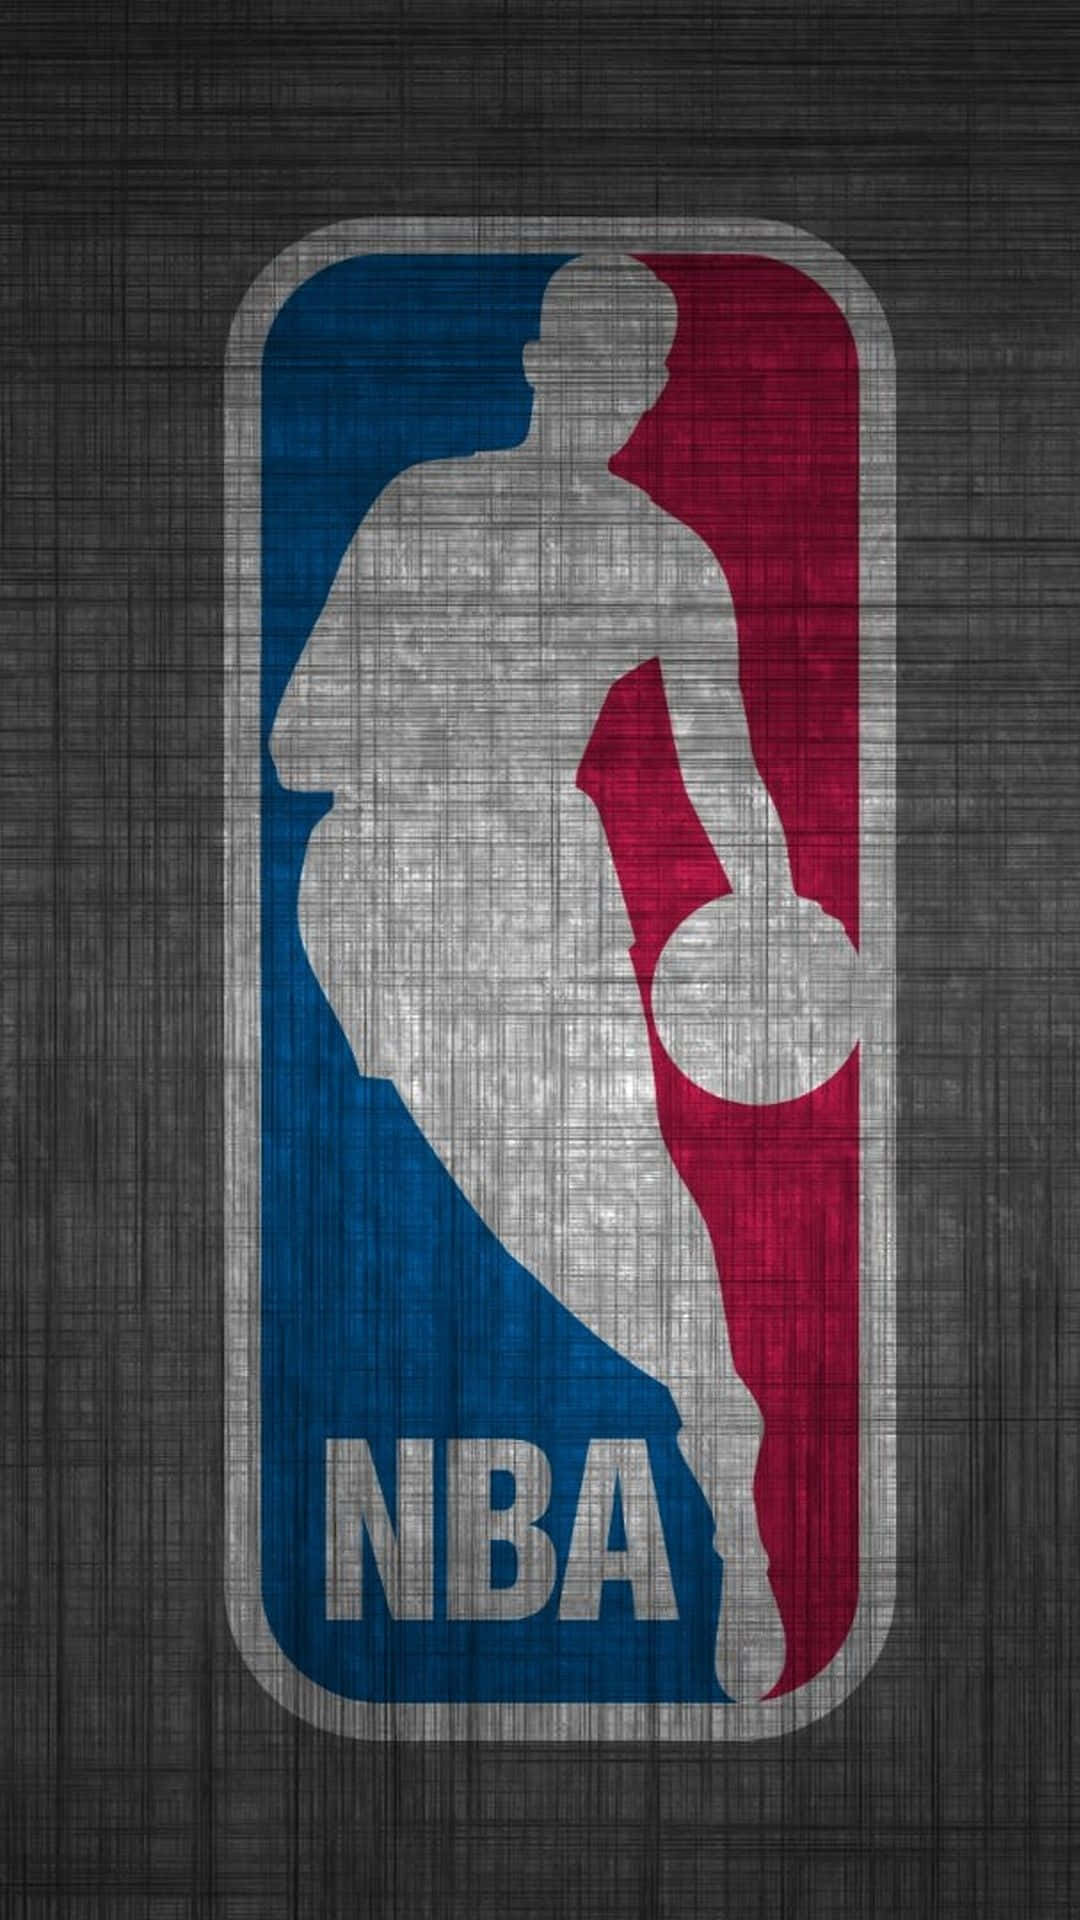 Show Your Passion For The Nba With A Custom Themed Phone! Background